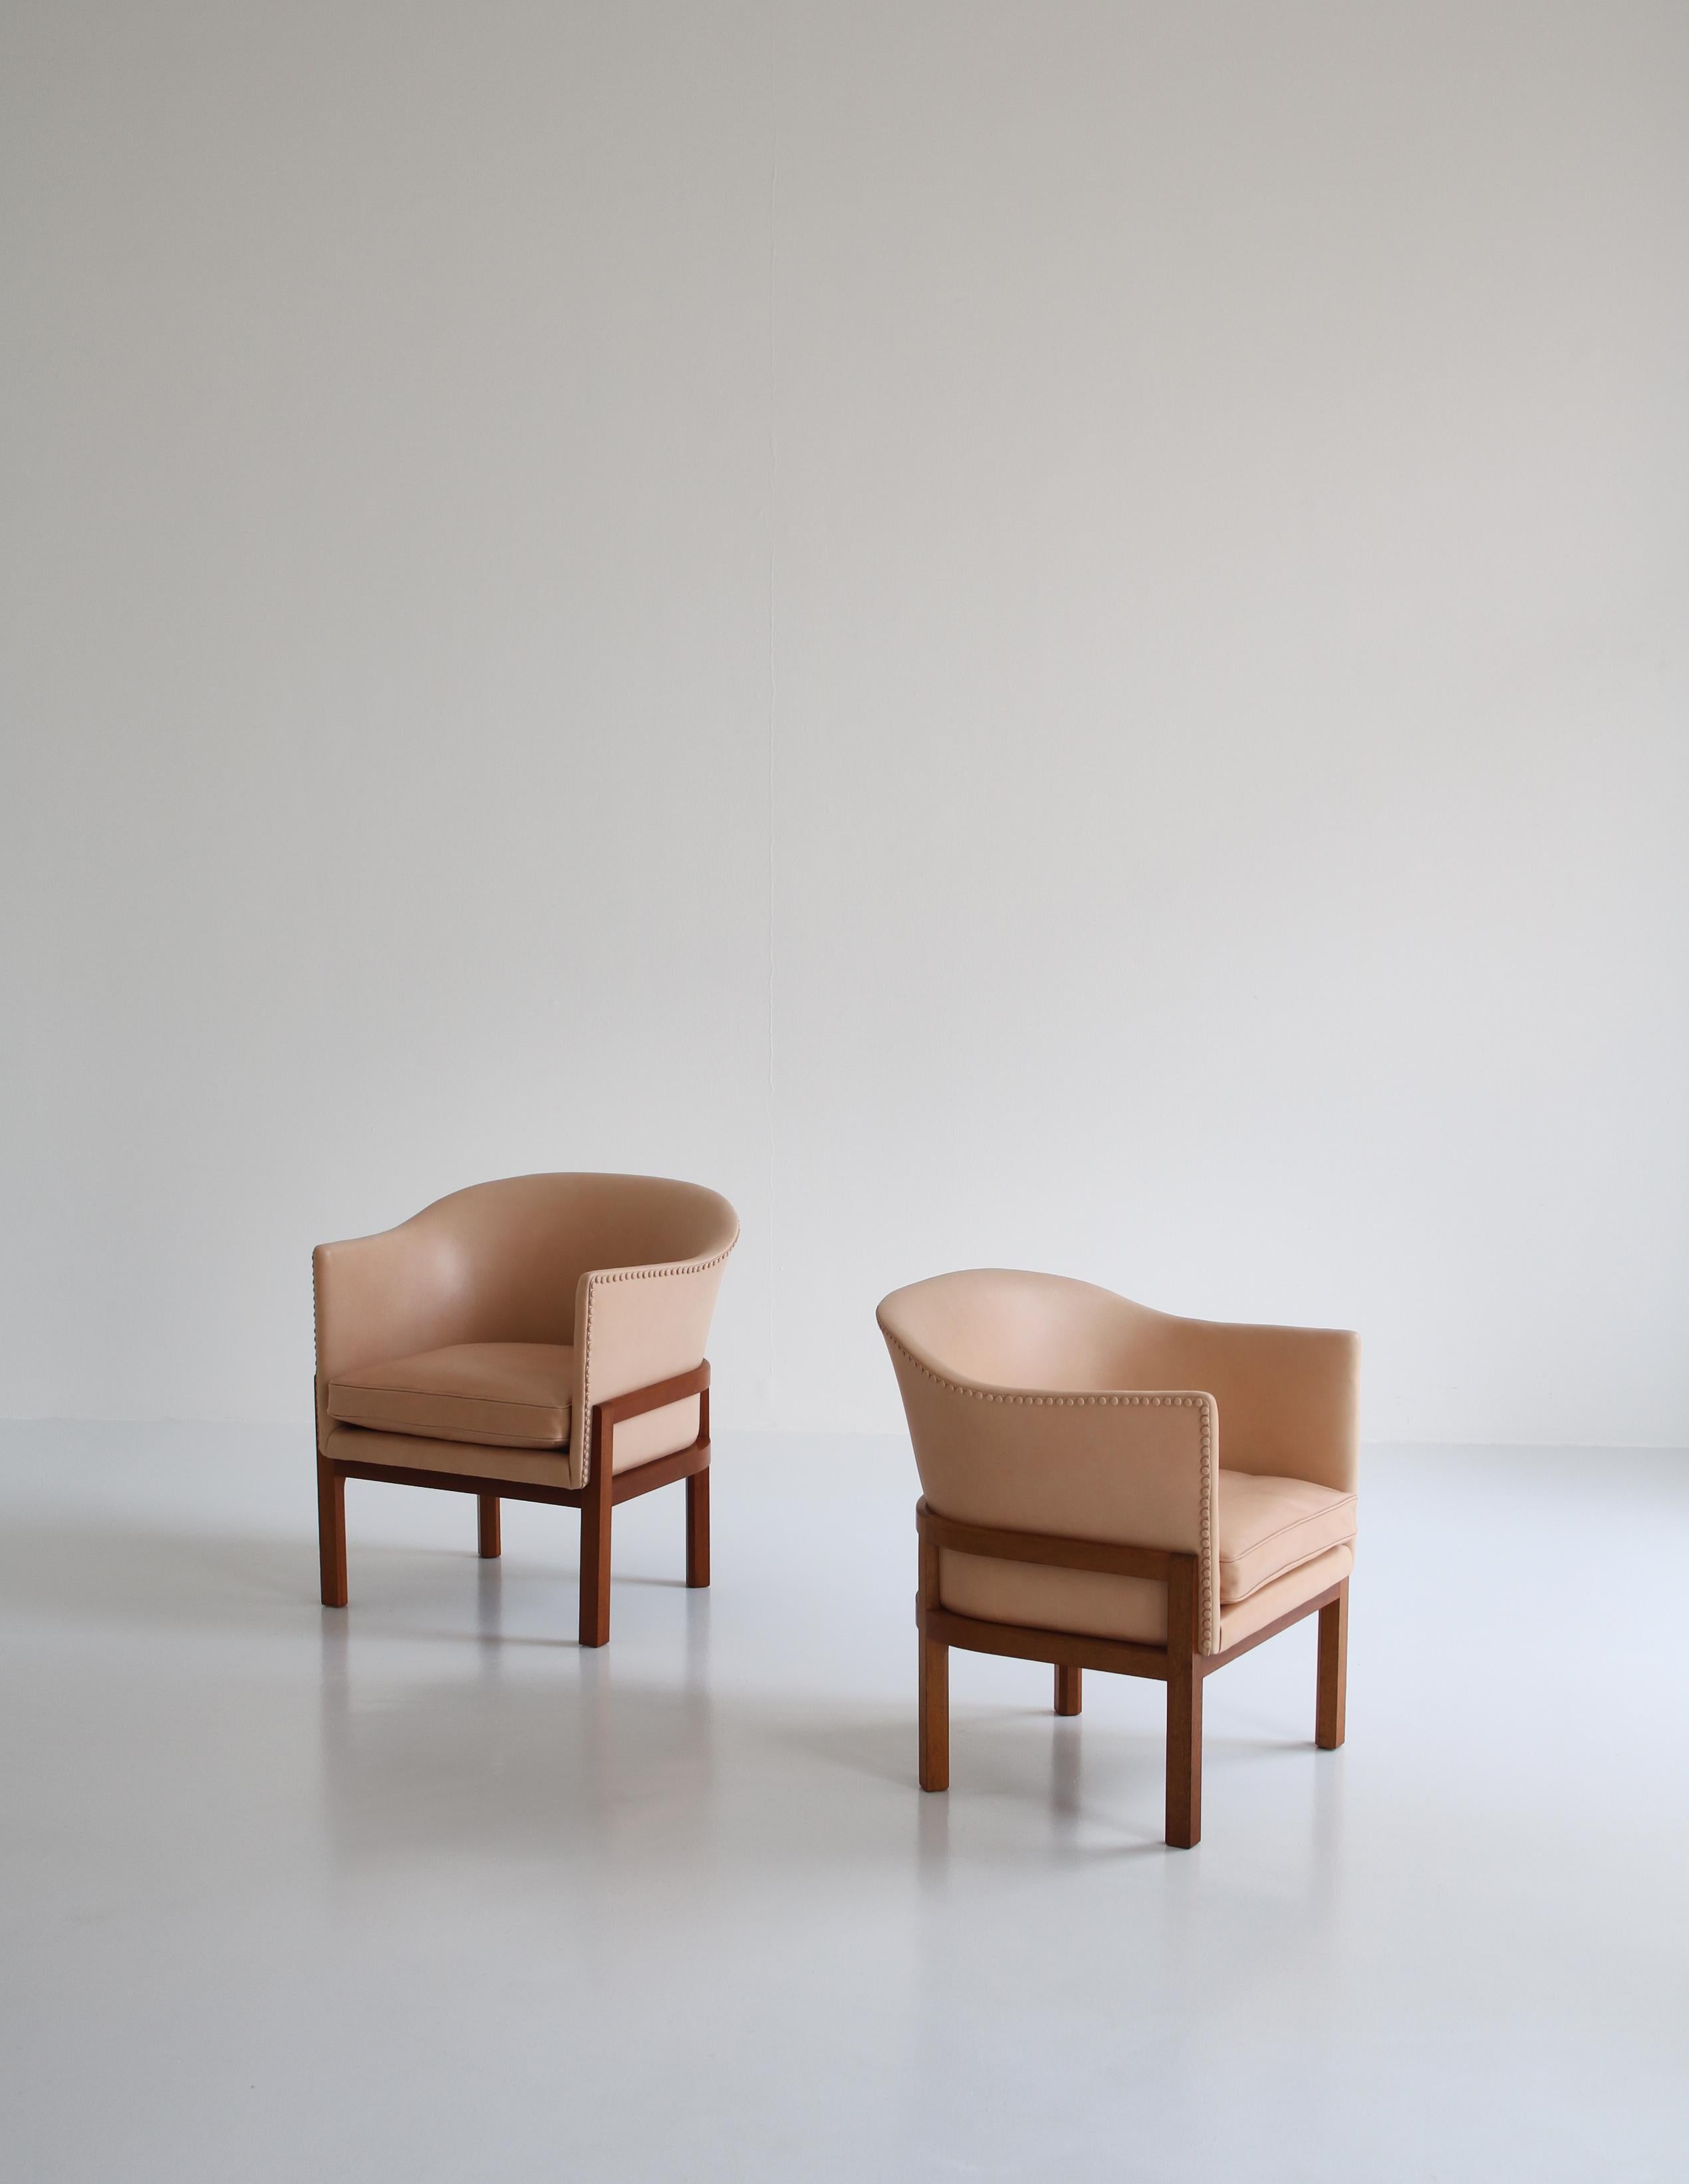 Set of elegant lounge chairs designed by Mogens Koch in 1936. This 